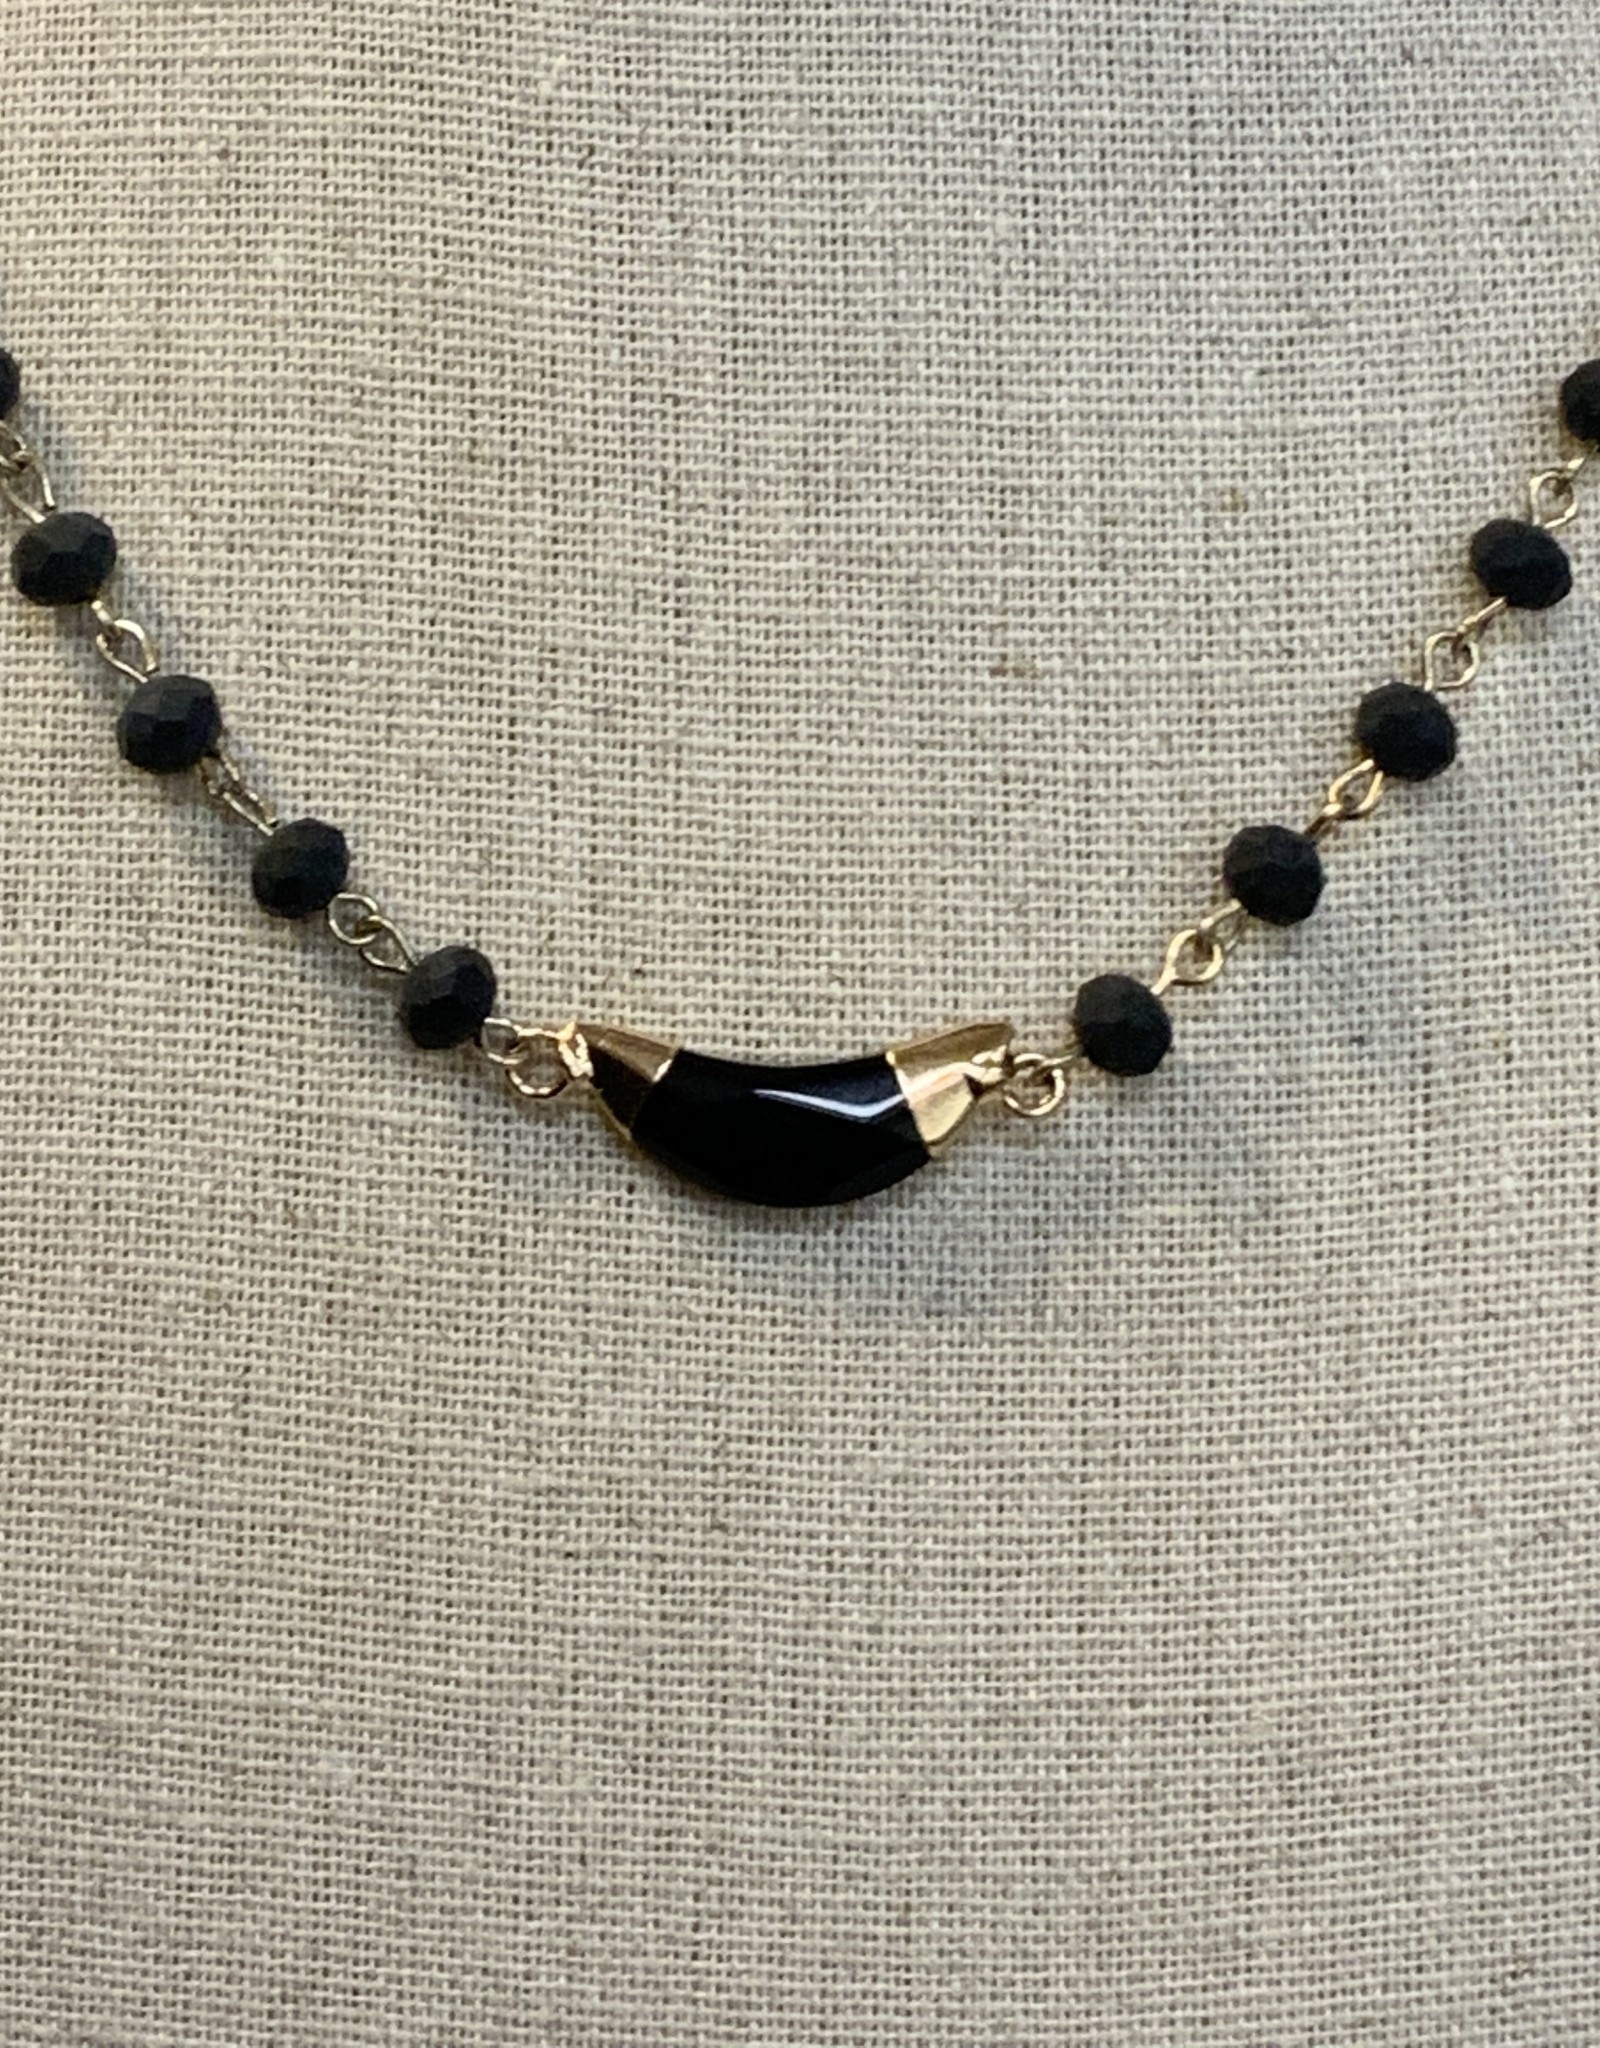 Gold Necklace w/Black Beads & Stone